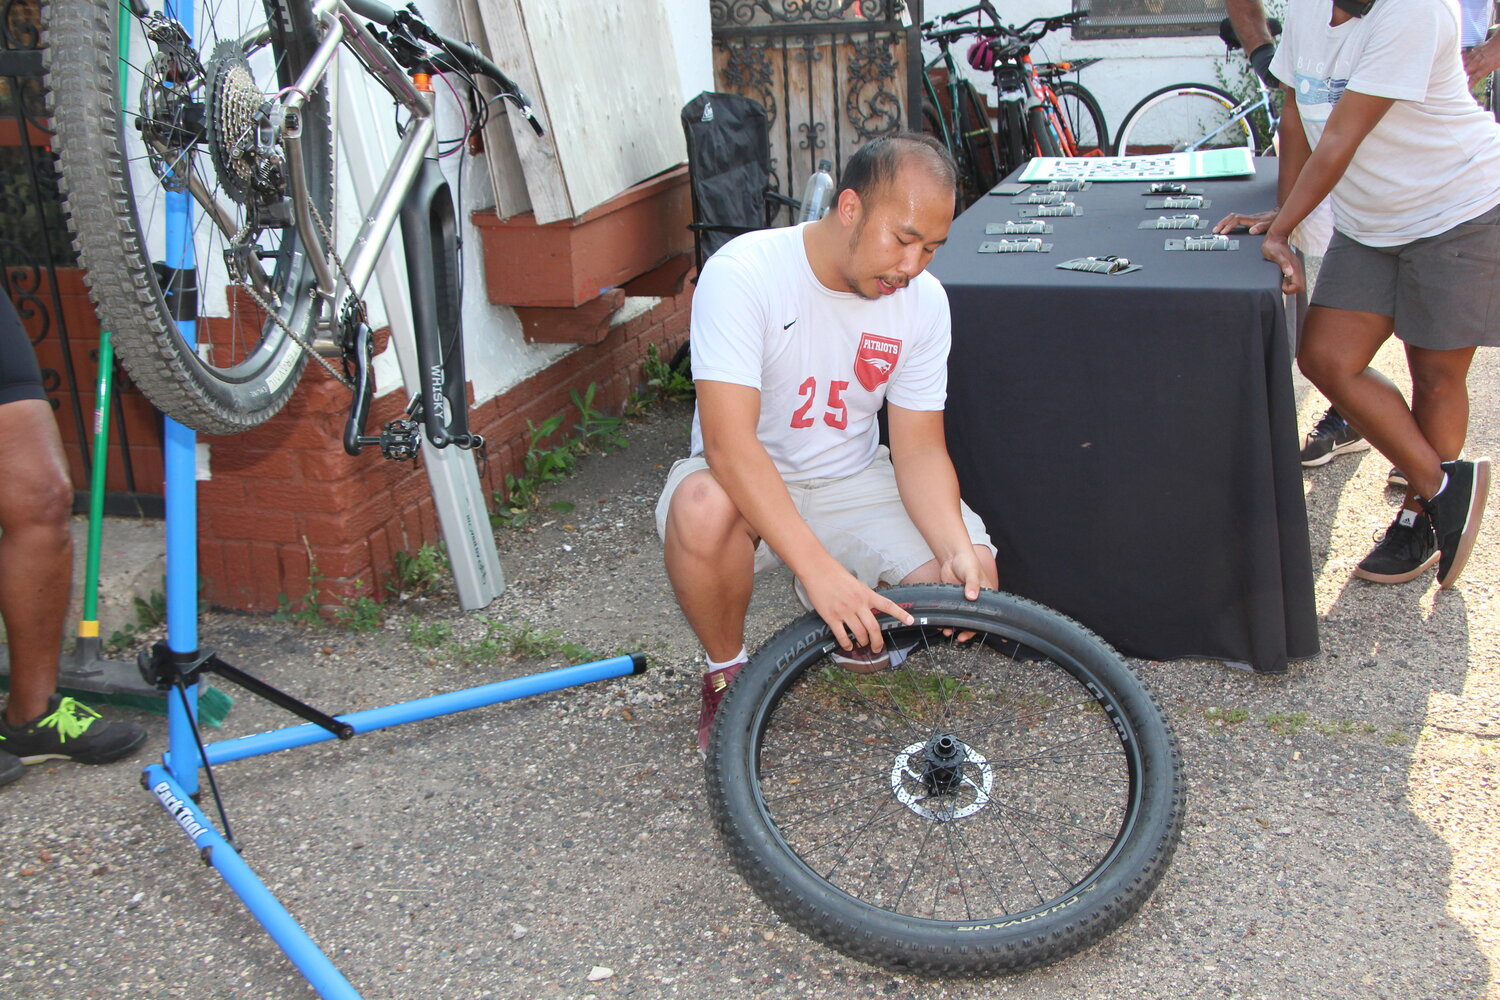 Slow Roll team demonstrates how to change a flat bike tire during the Hotter than July Southside Late Solstice Roll on Thursday, June 29.